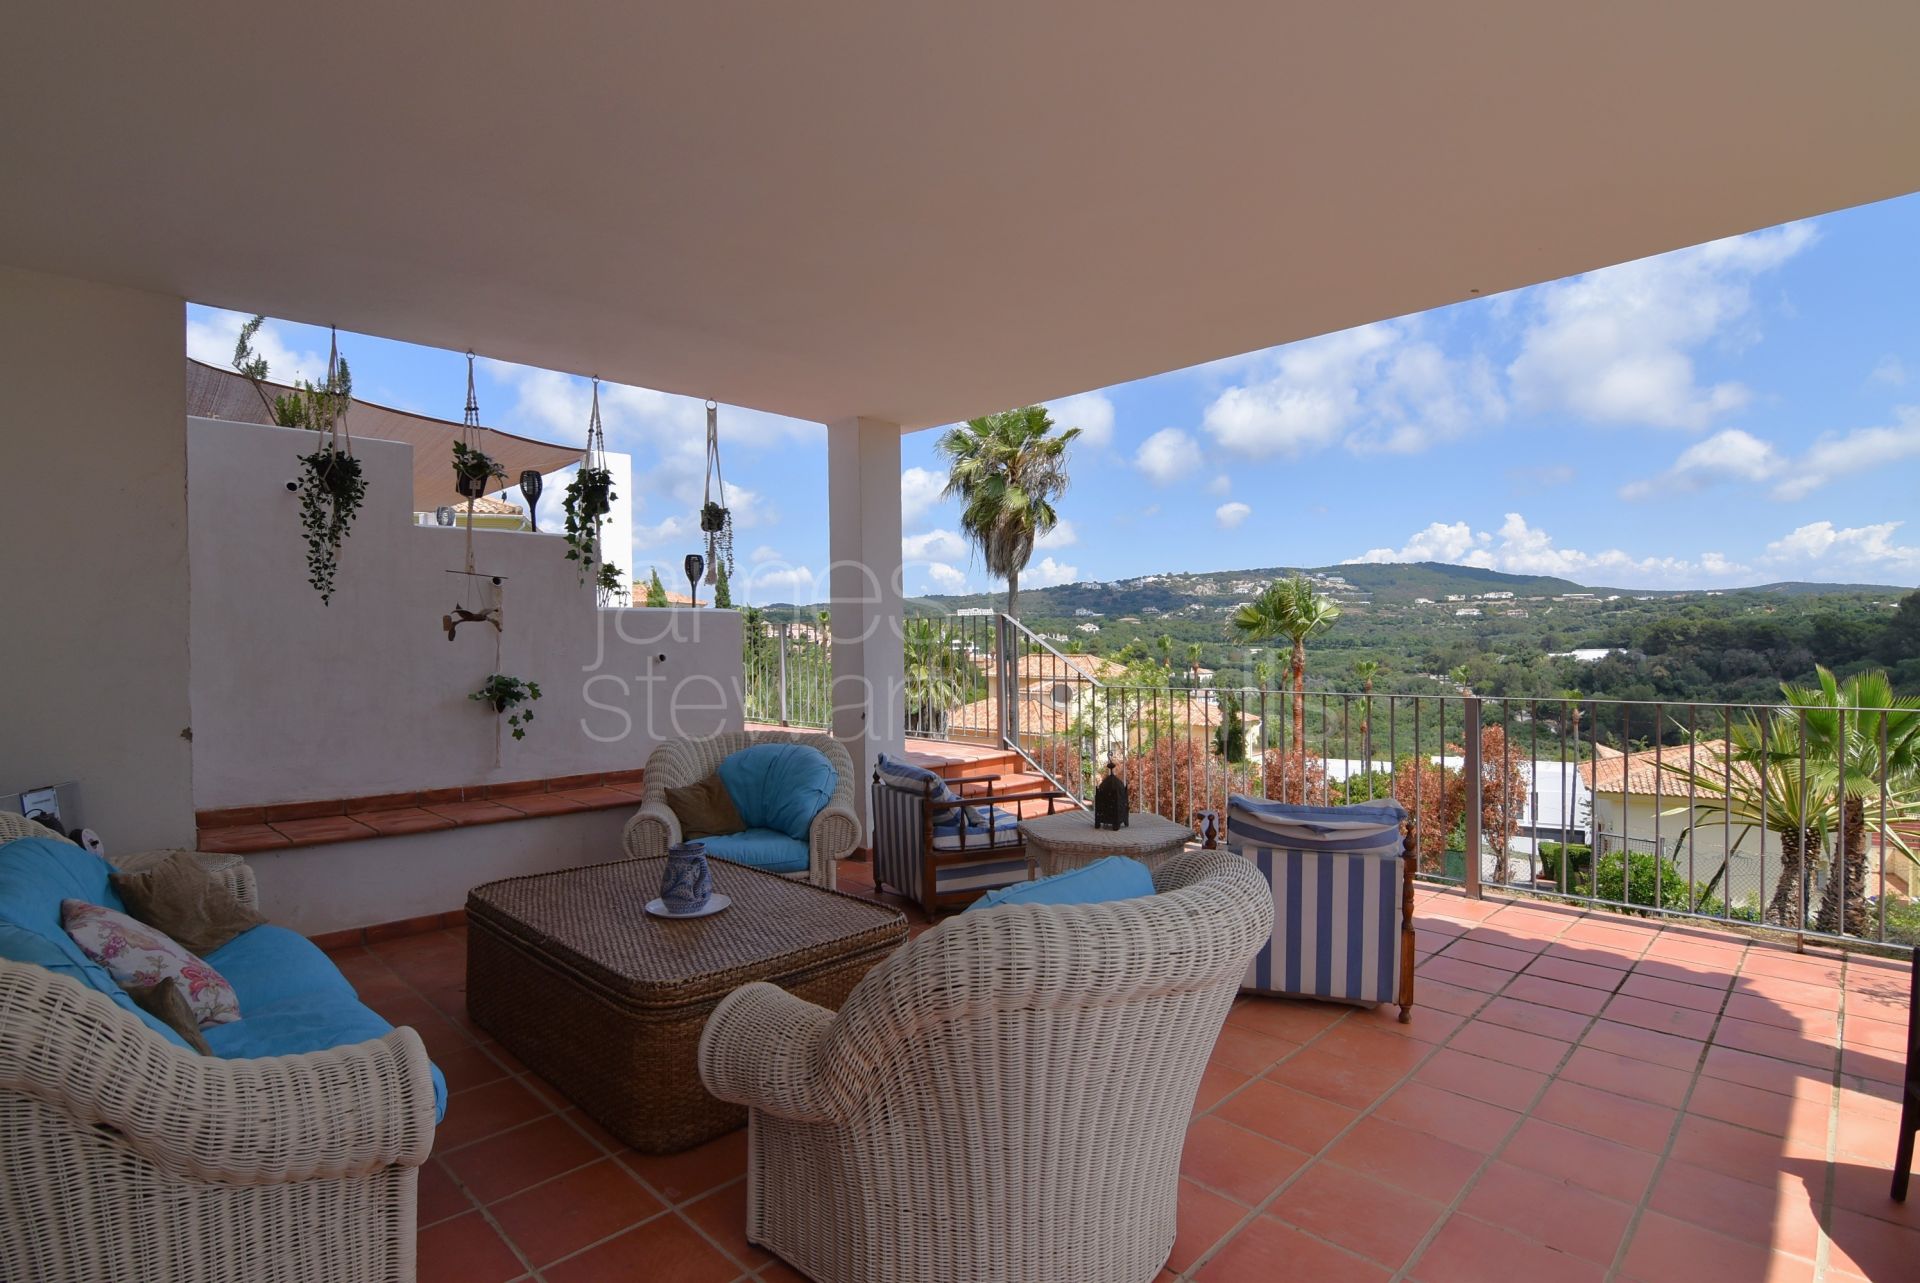 Great family home with elevated views overlooking Sotogrande and the surrounding countryside